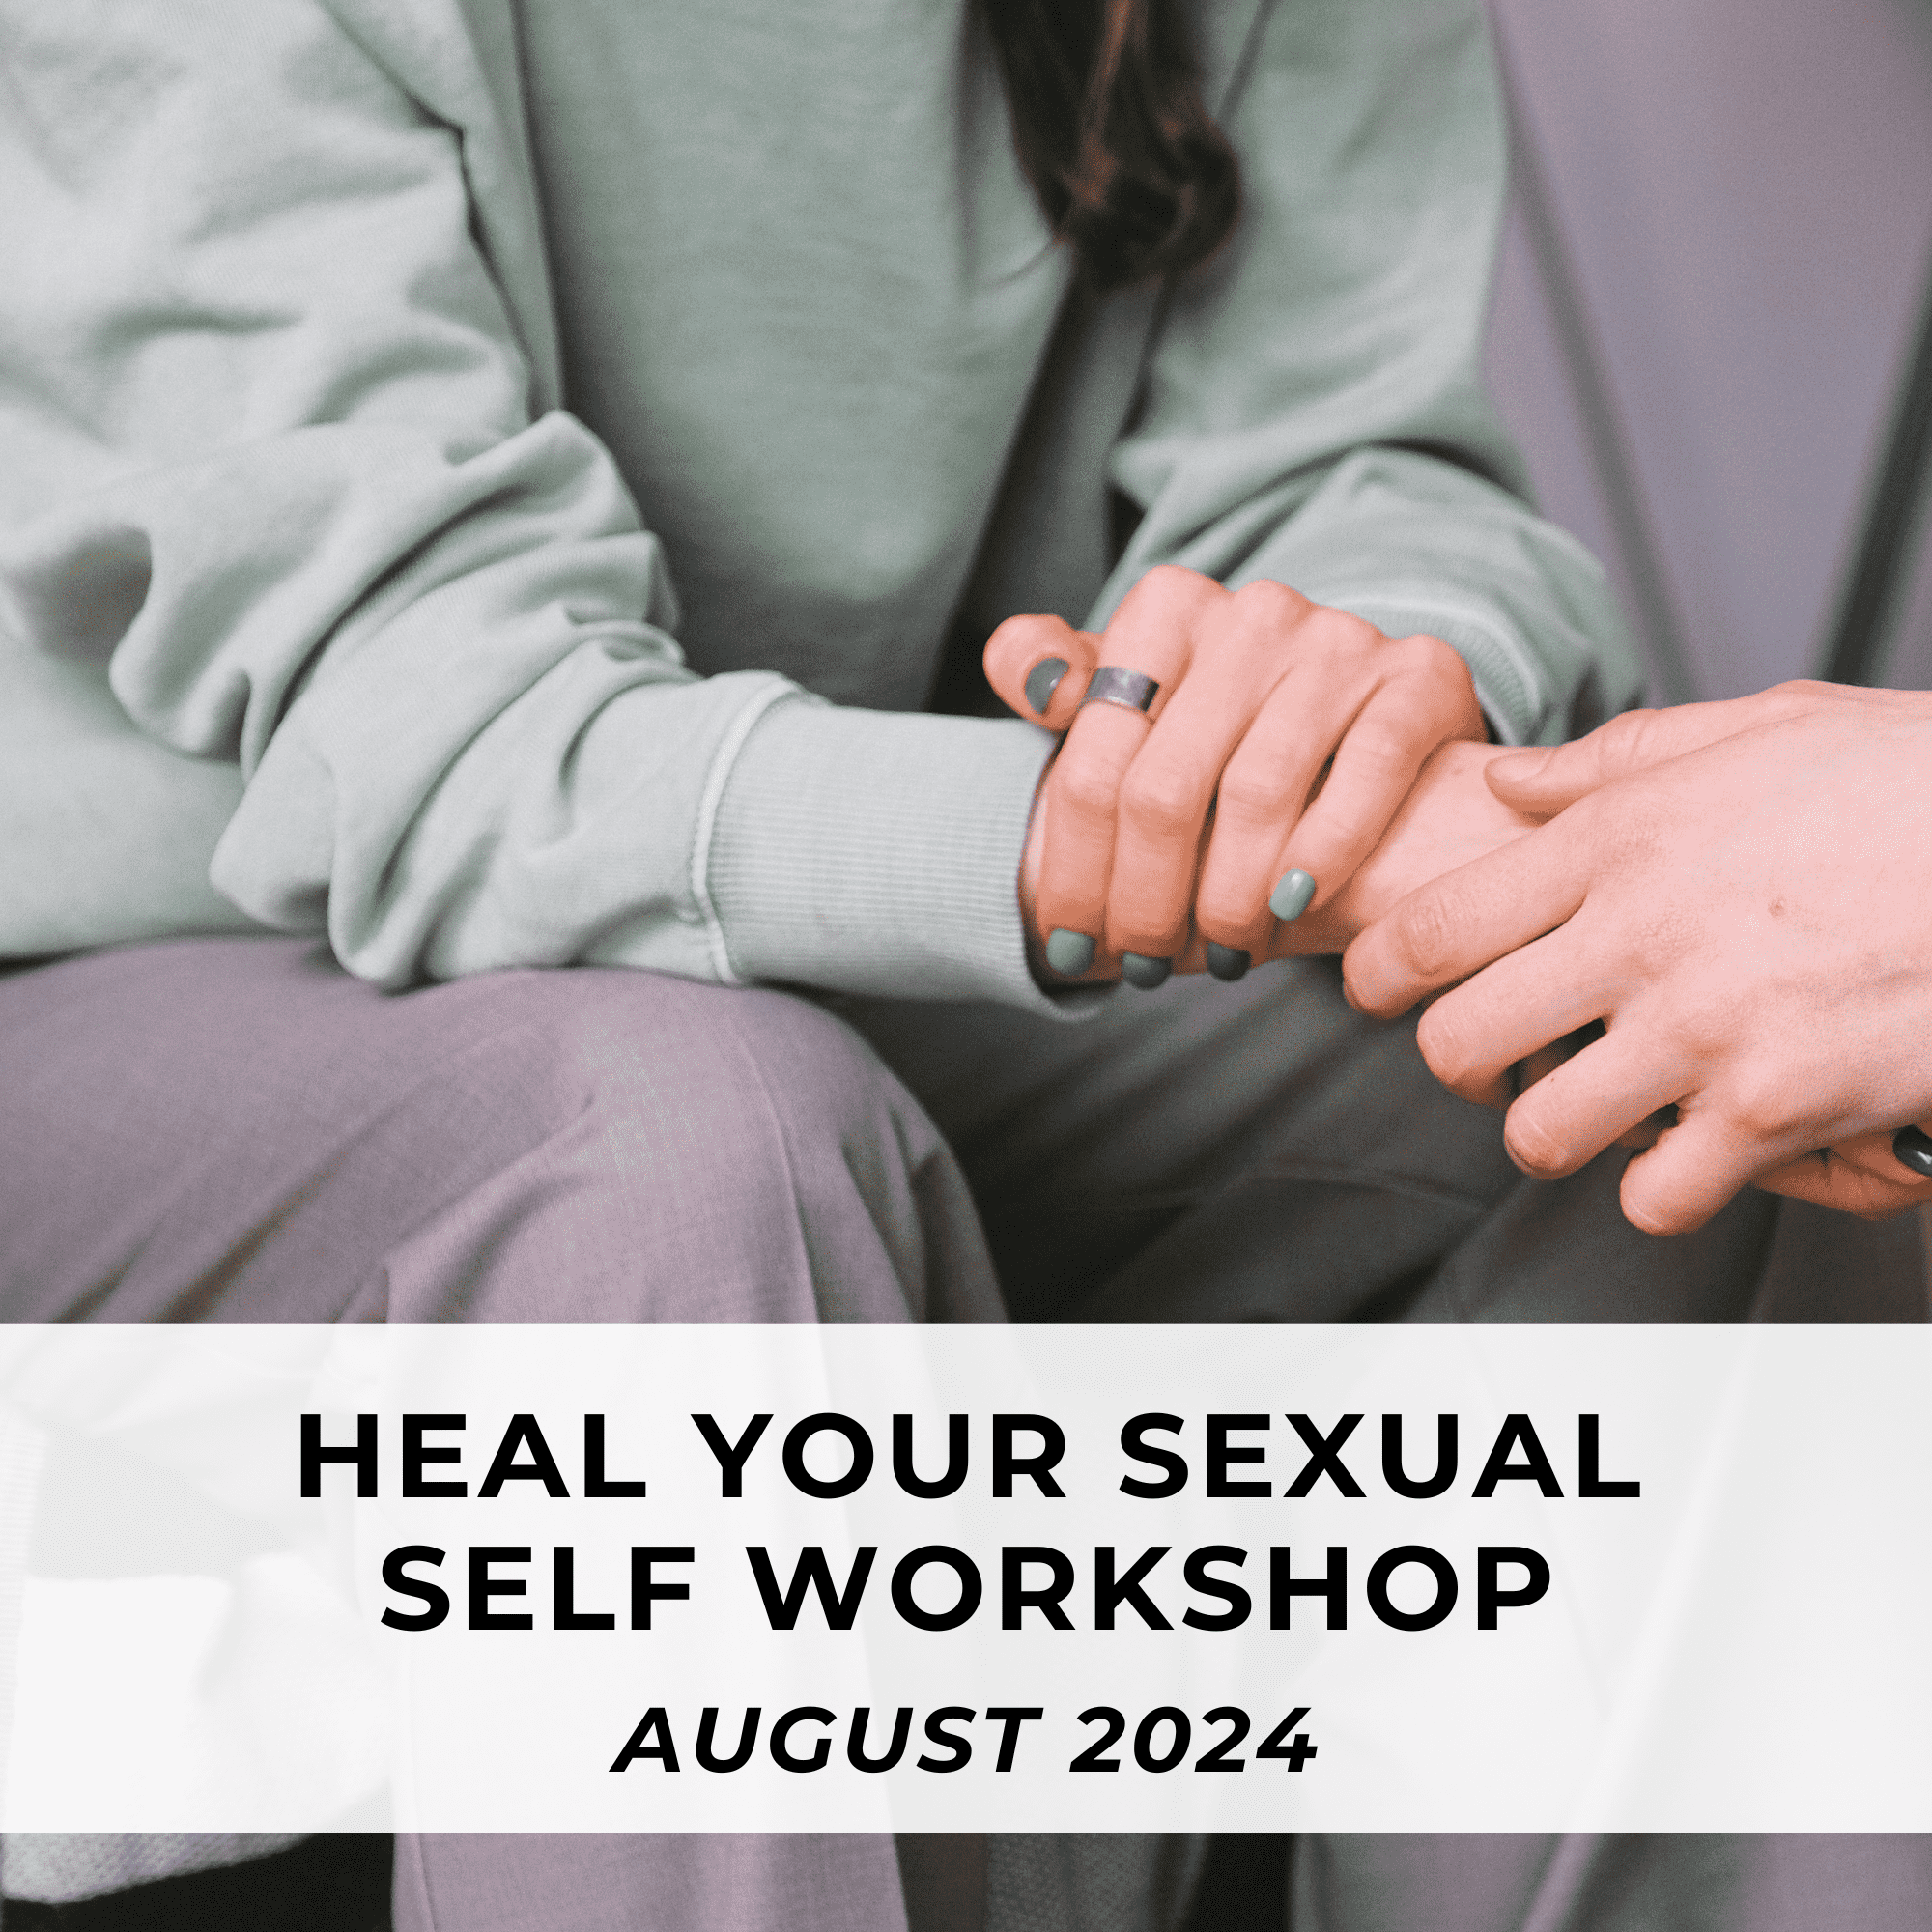 Heal your sexual self